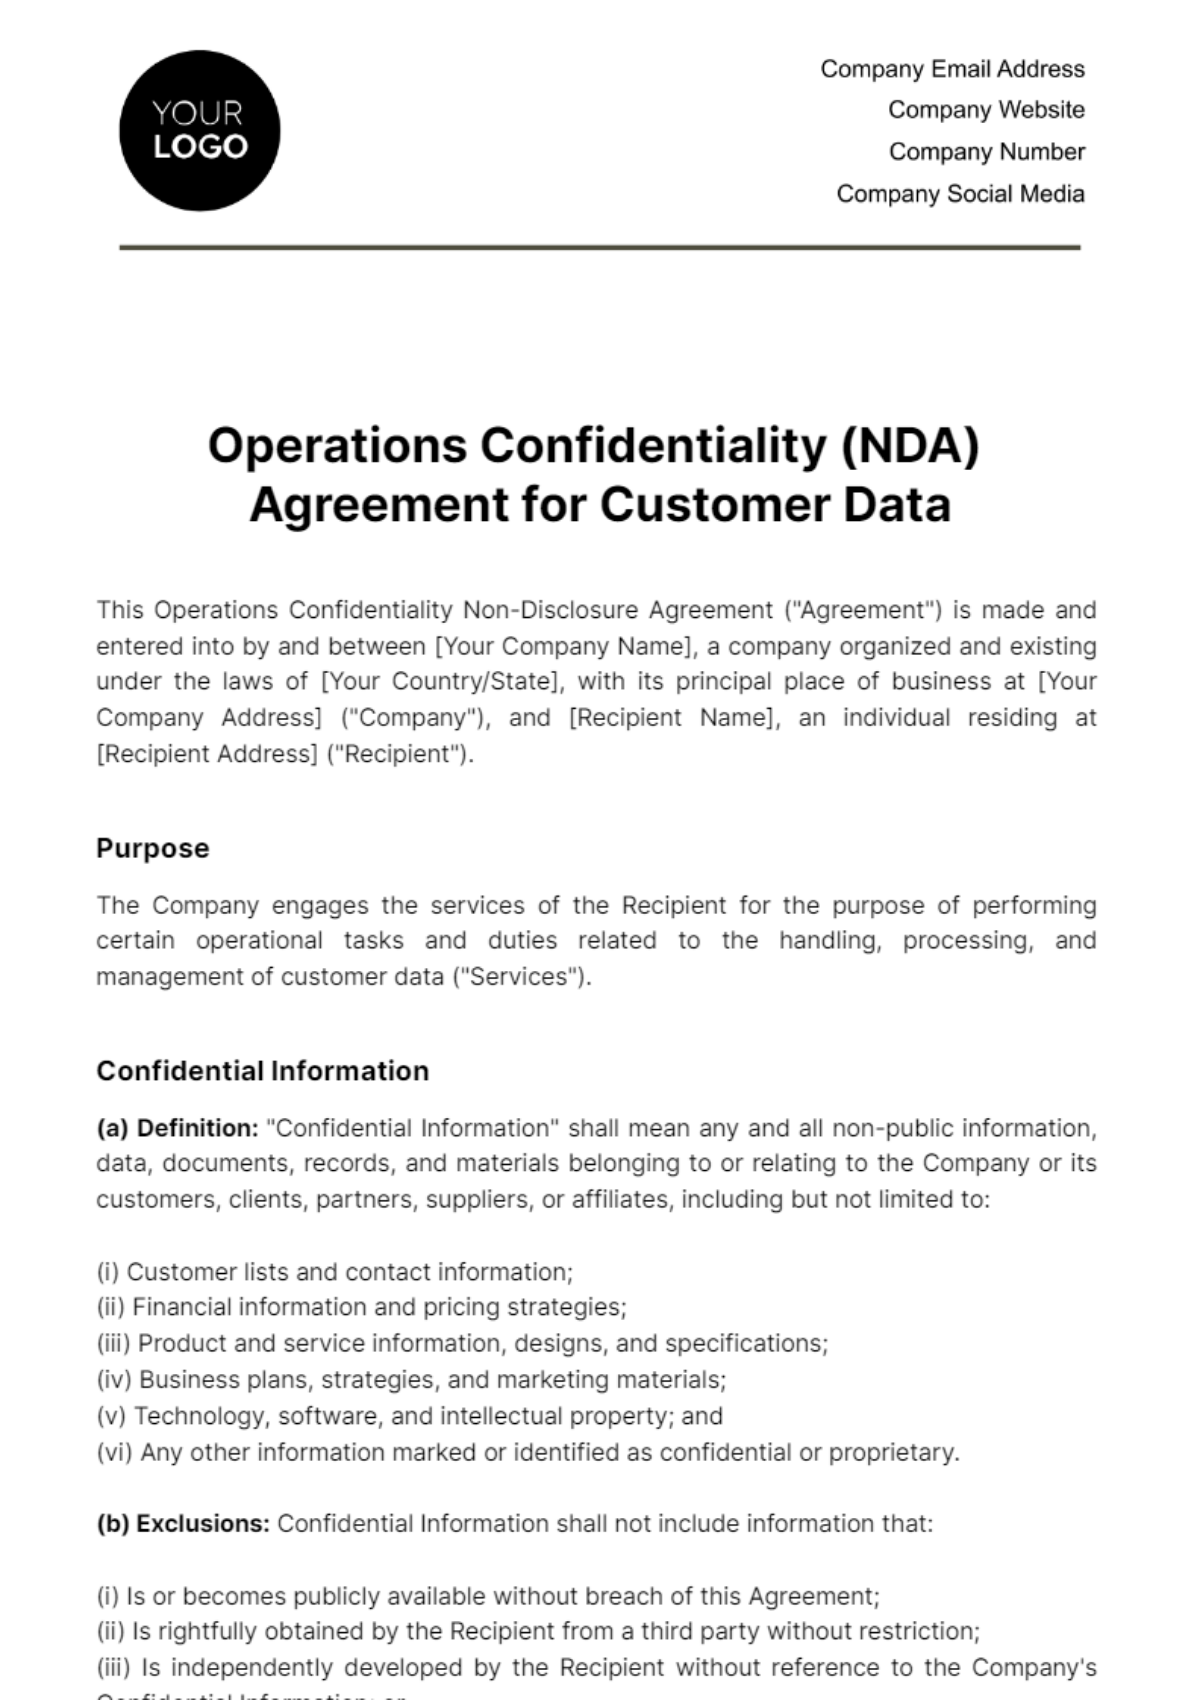 Operations Confidentiality (NDA) Agreement for Customer Data Template